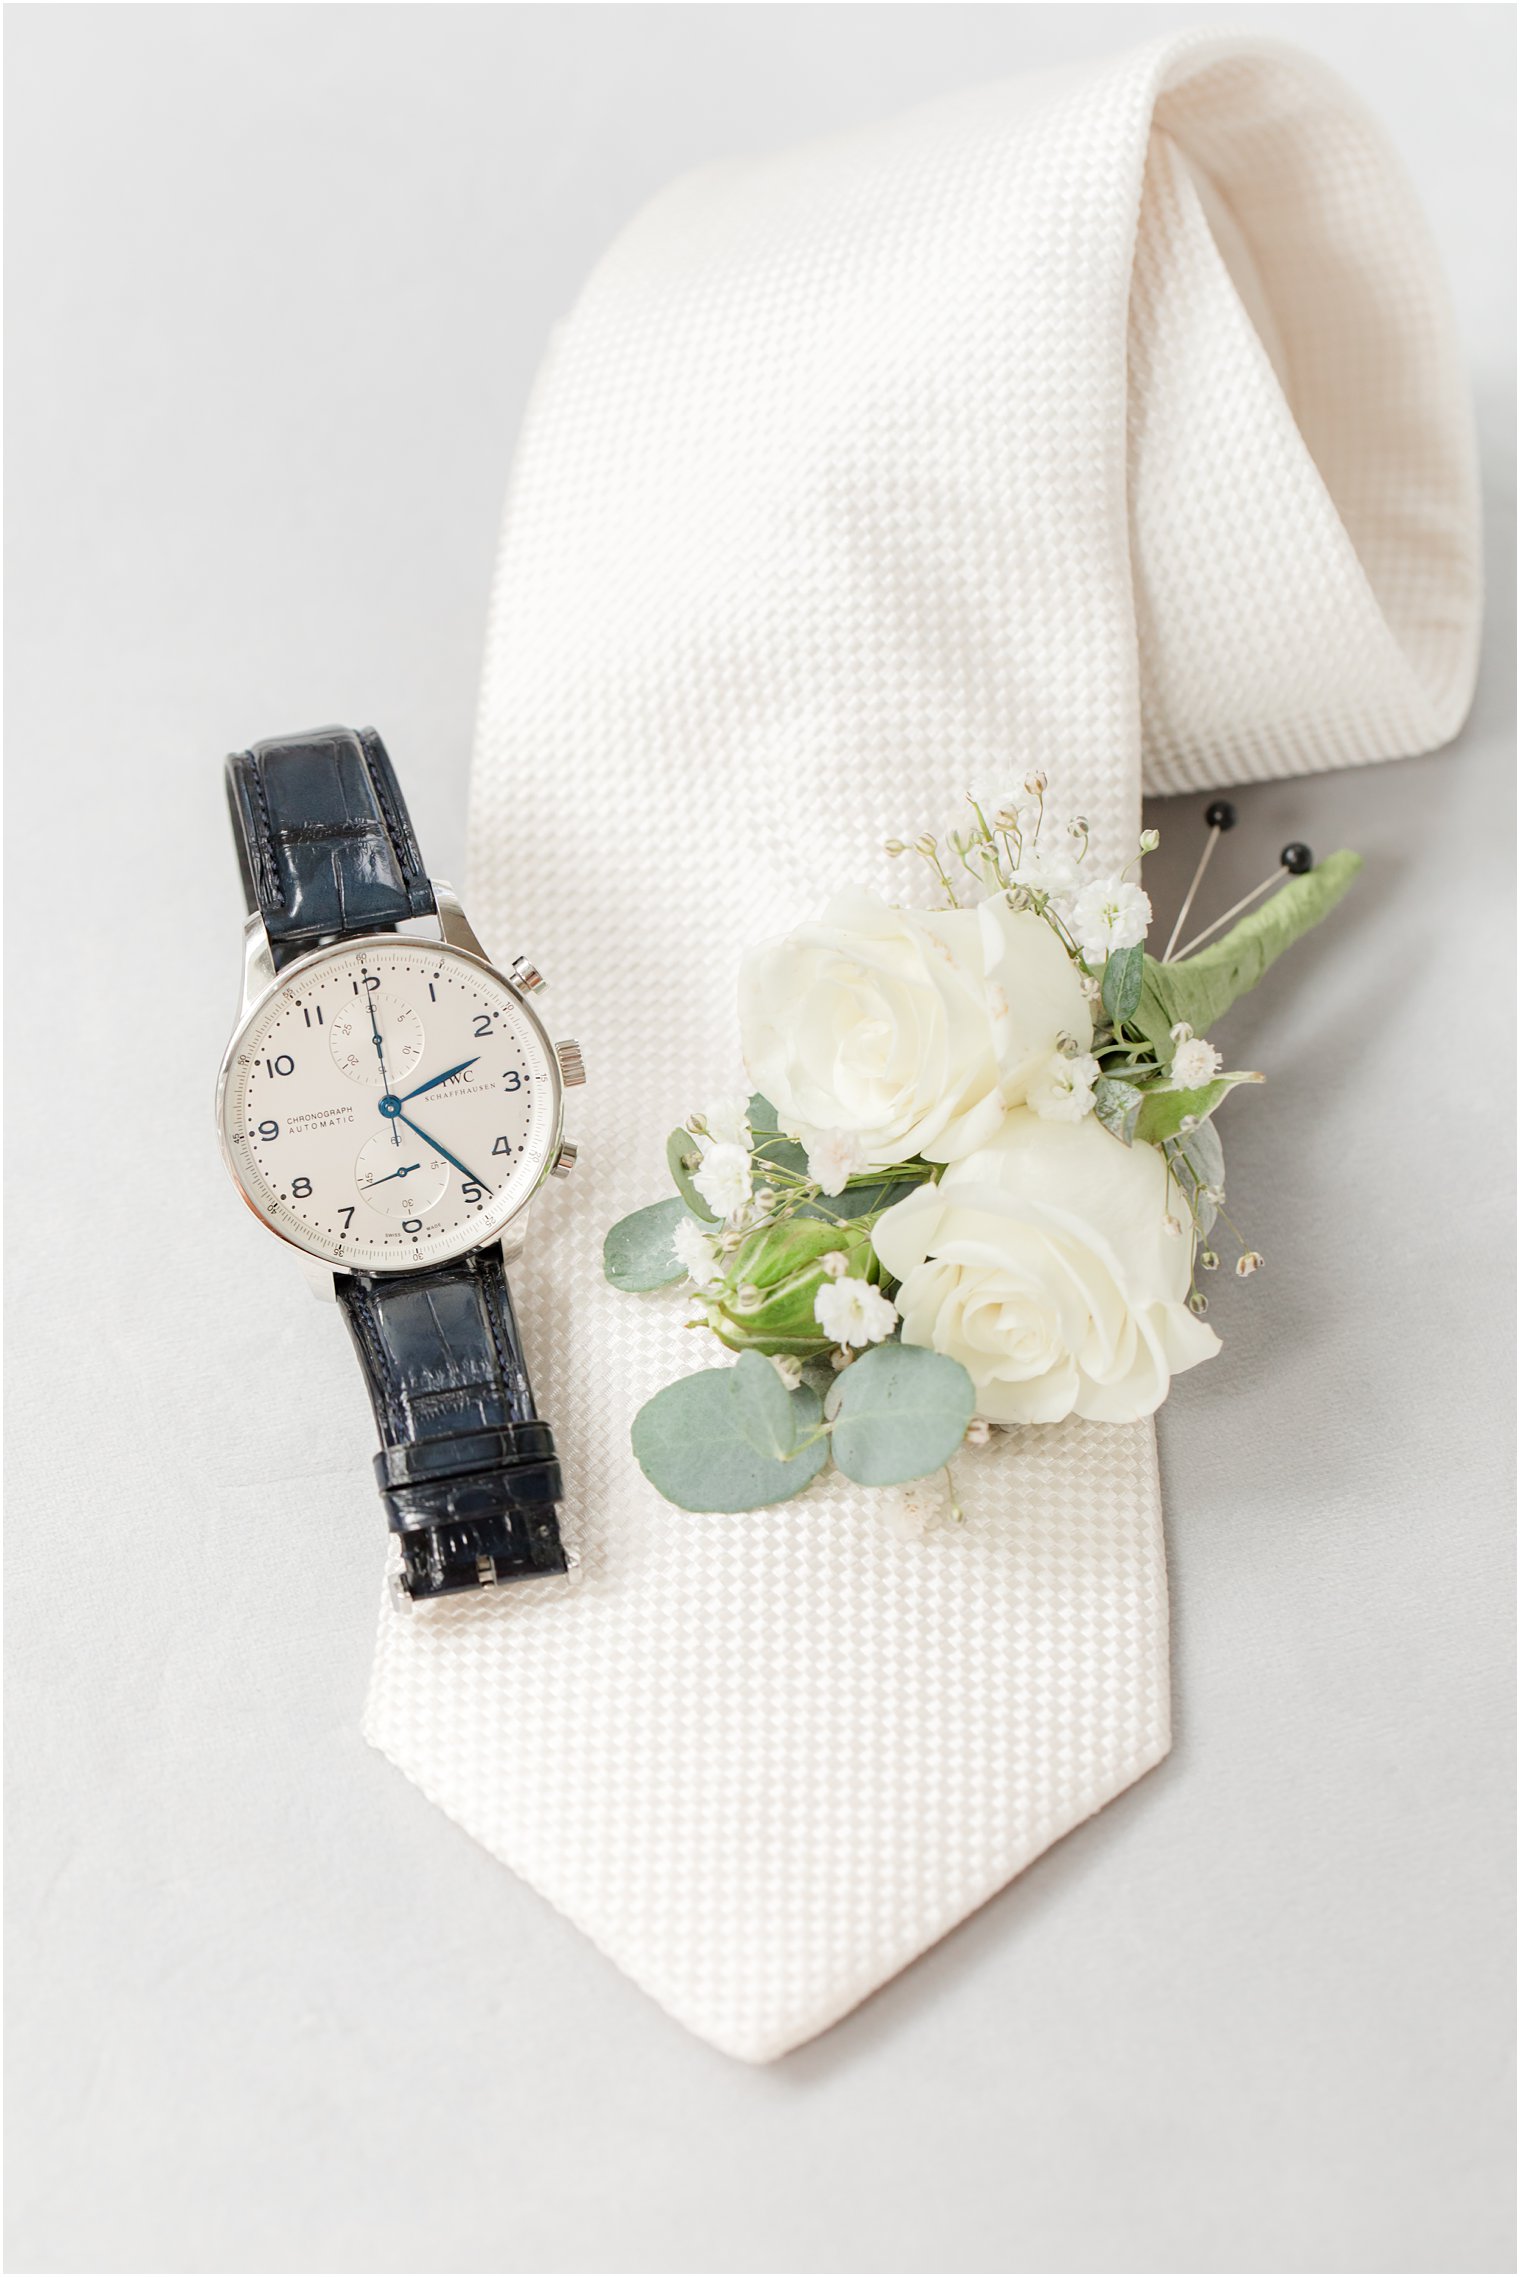 groom's watch, tie, and boutonniere